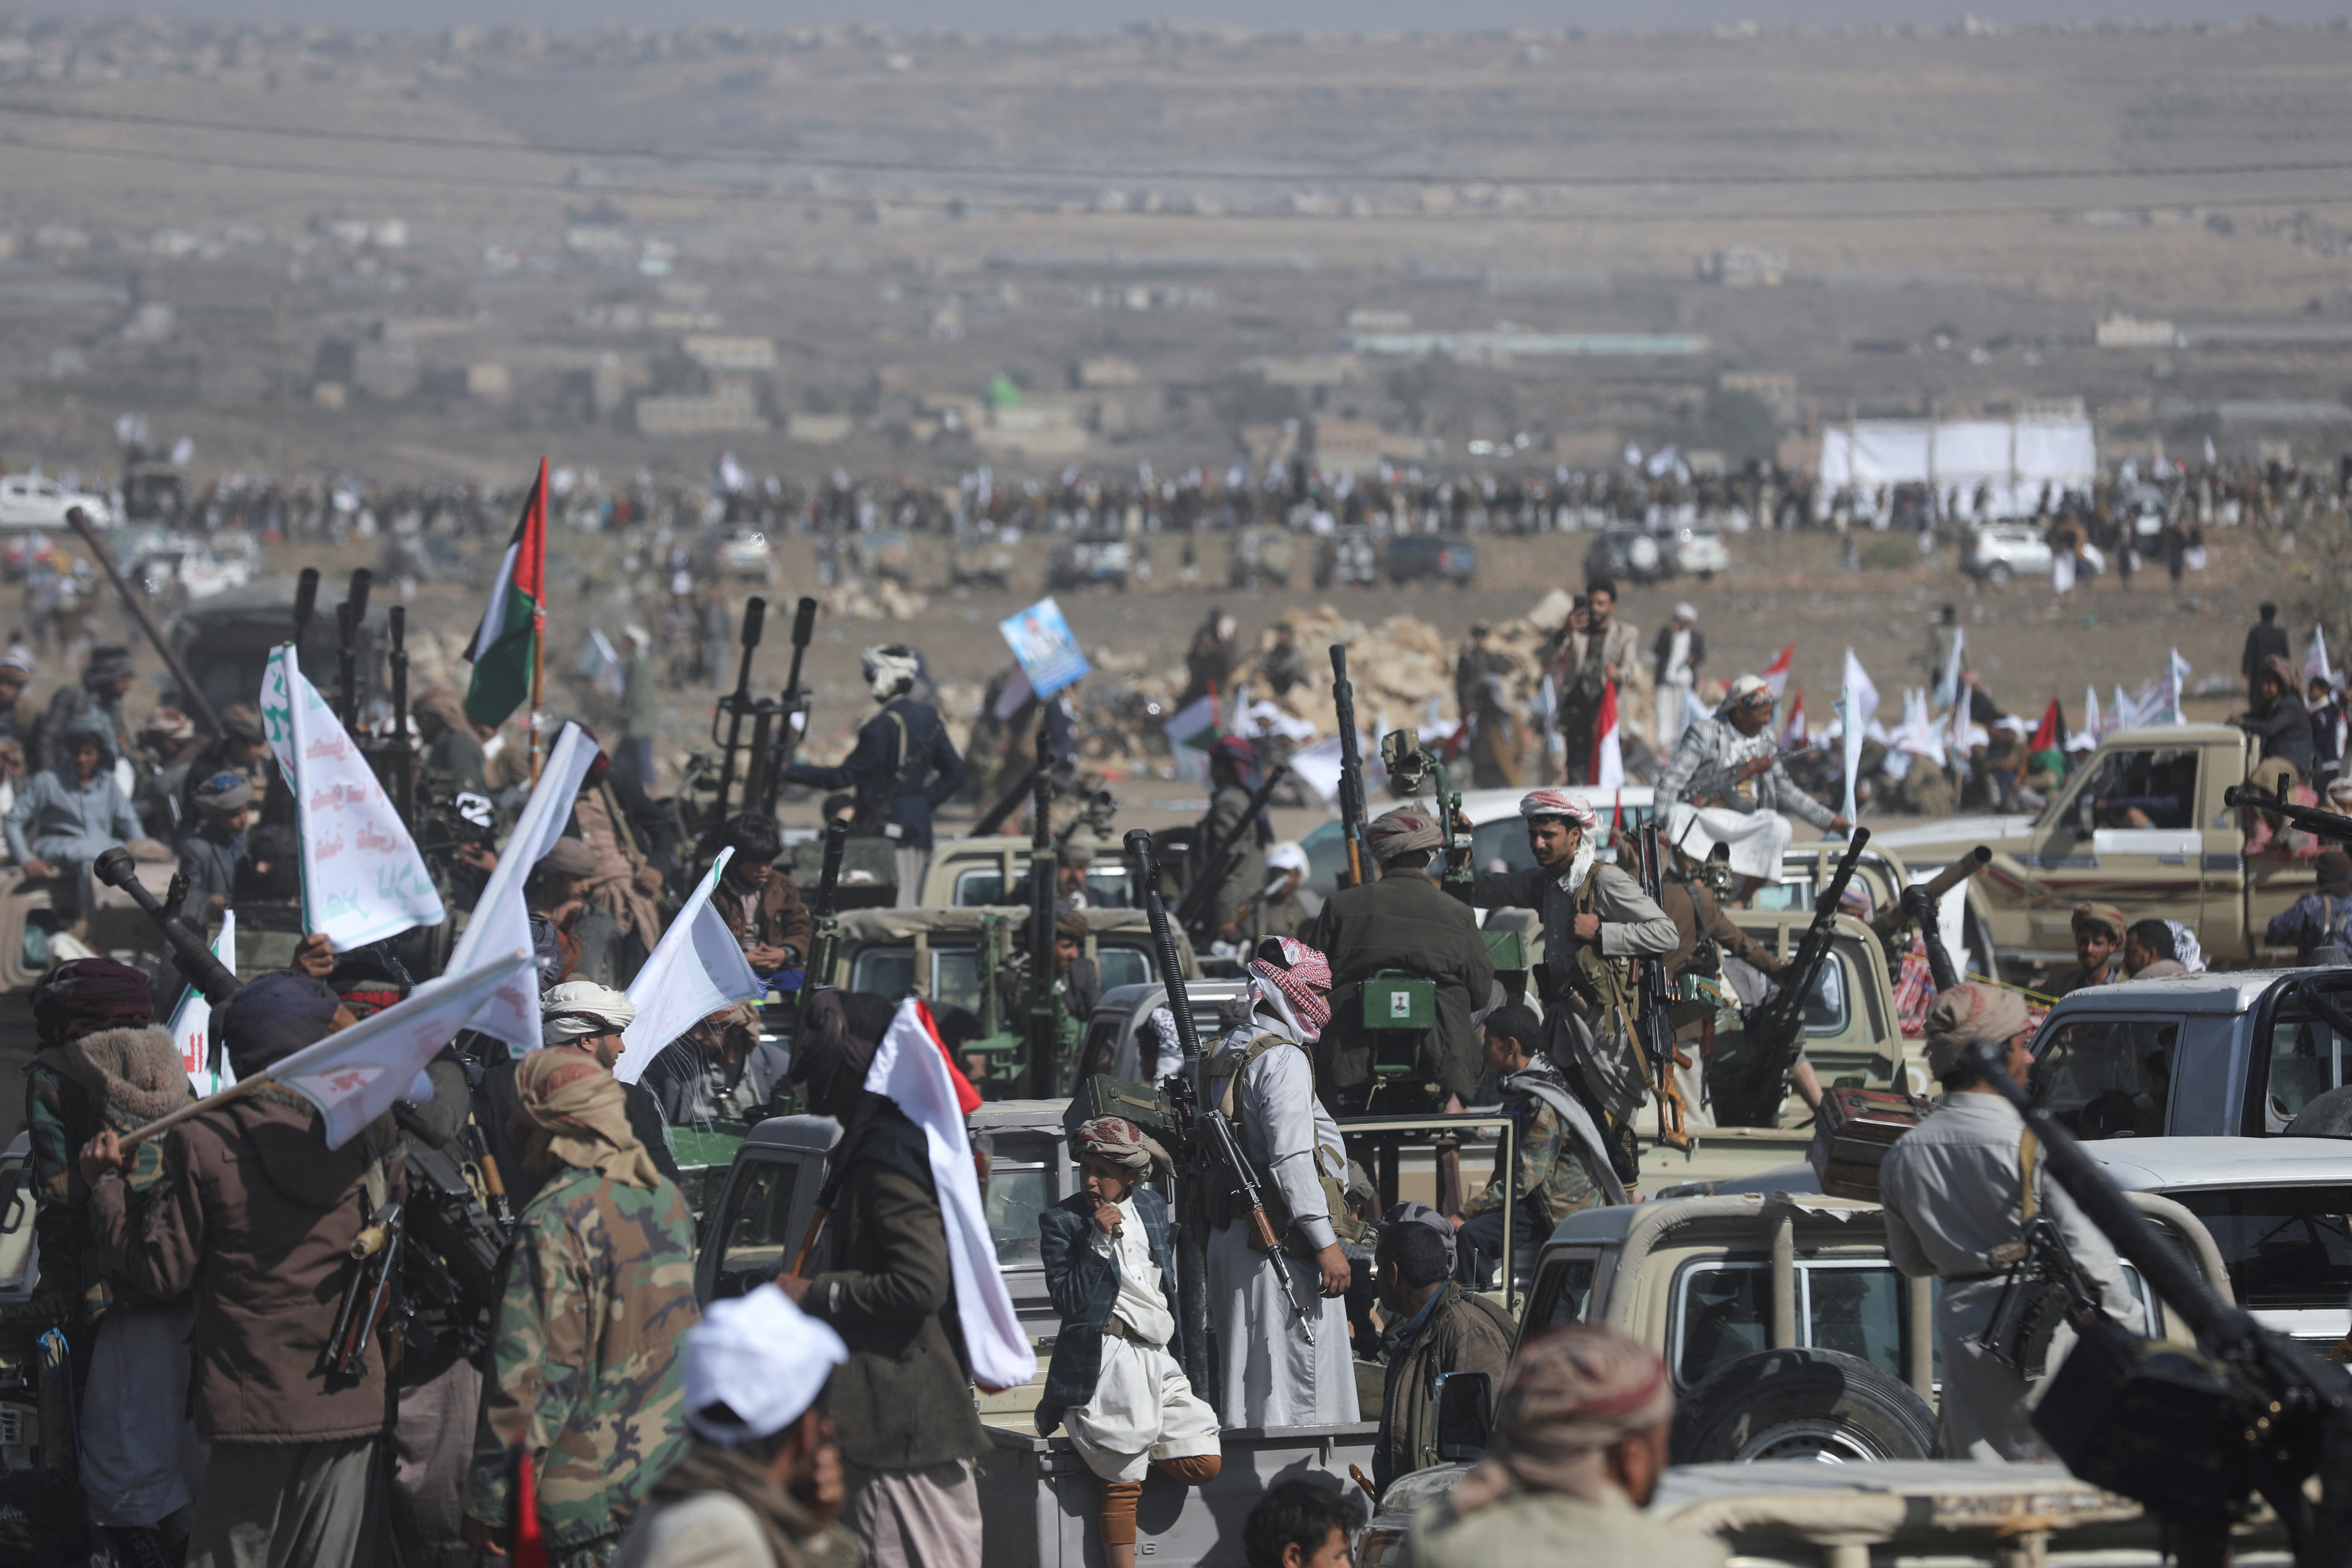 Houthi tribesmen parade to show defiance after U.S. and U.K. air strikes on Houthi positions near Sanaa